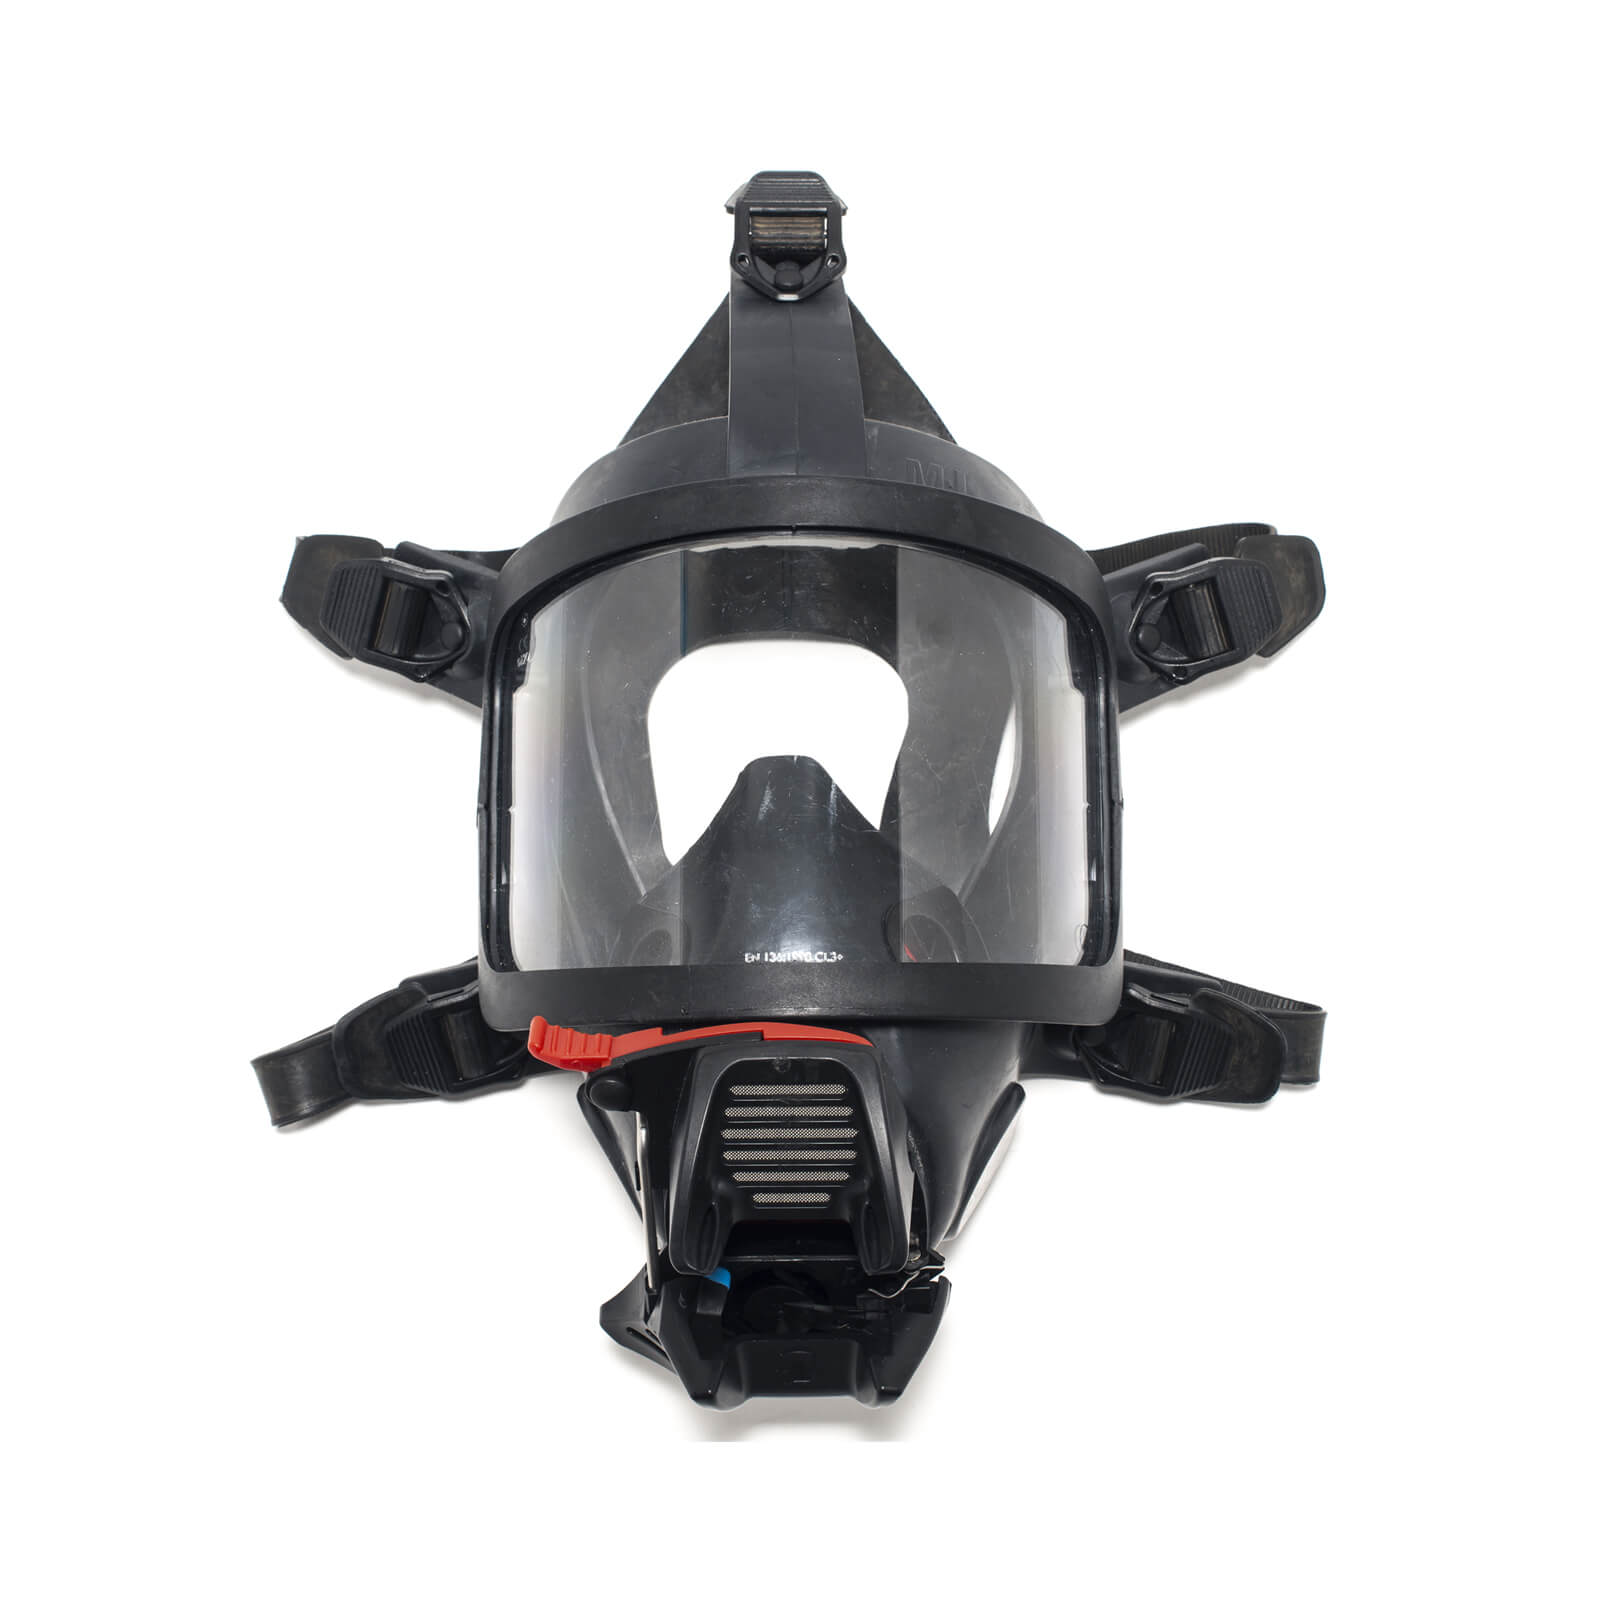 Face mask for Interspiro breathing apparatus Inspire-H